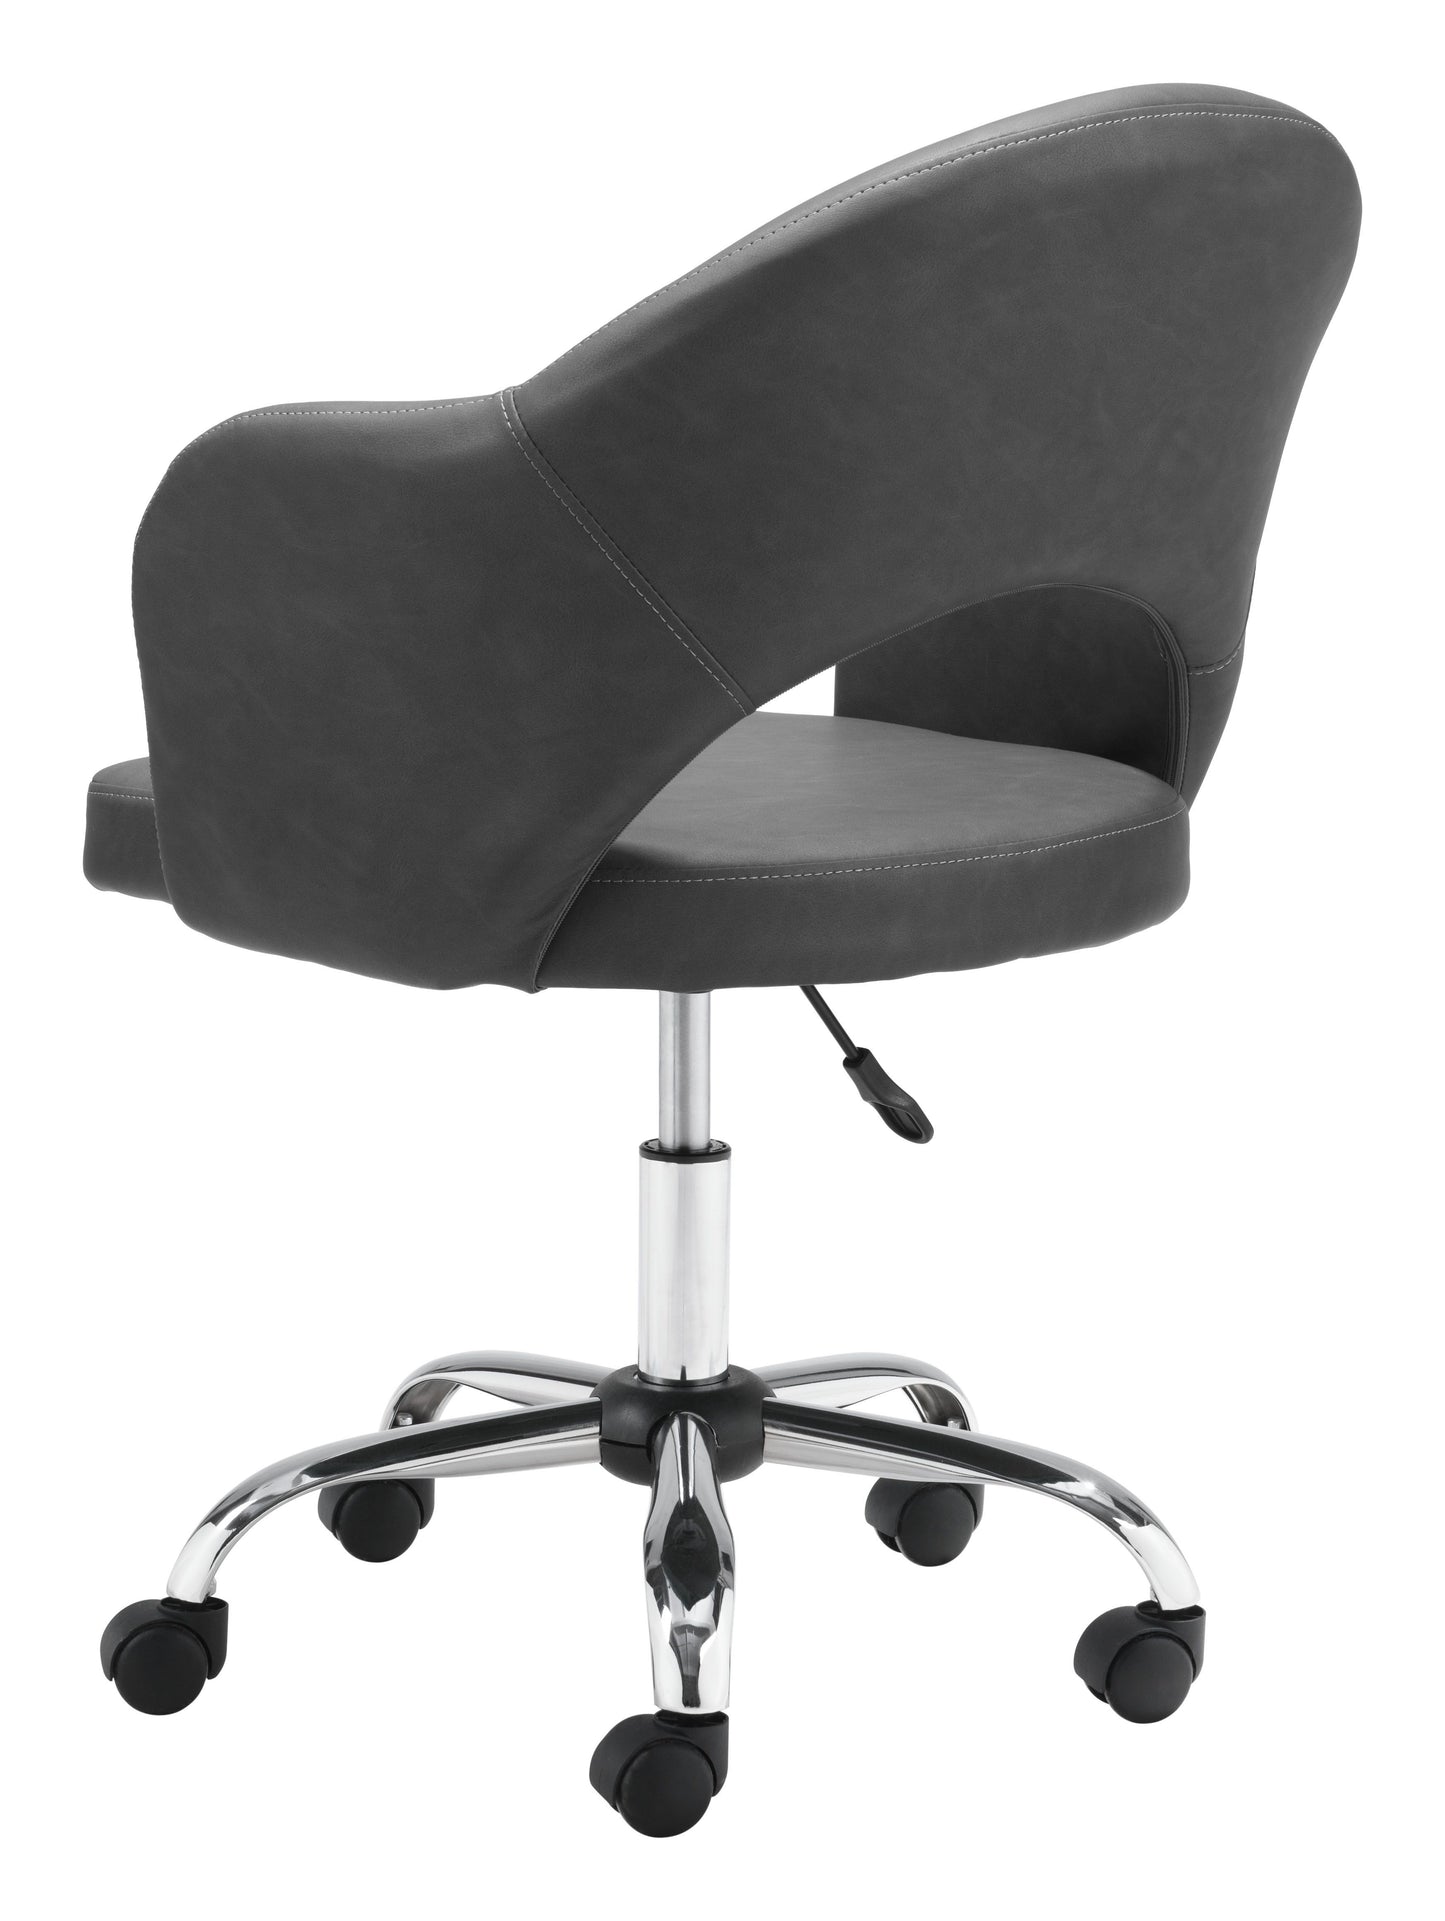 Planner Office Chair Gray